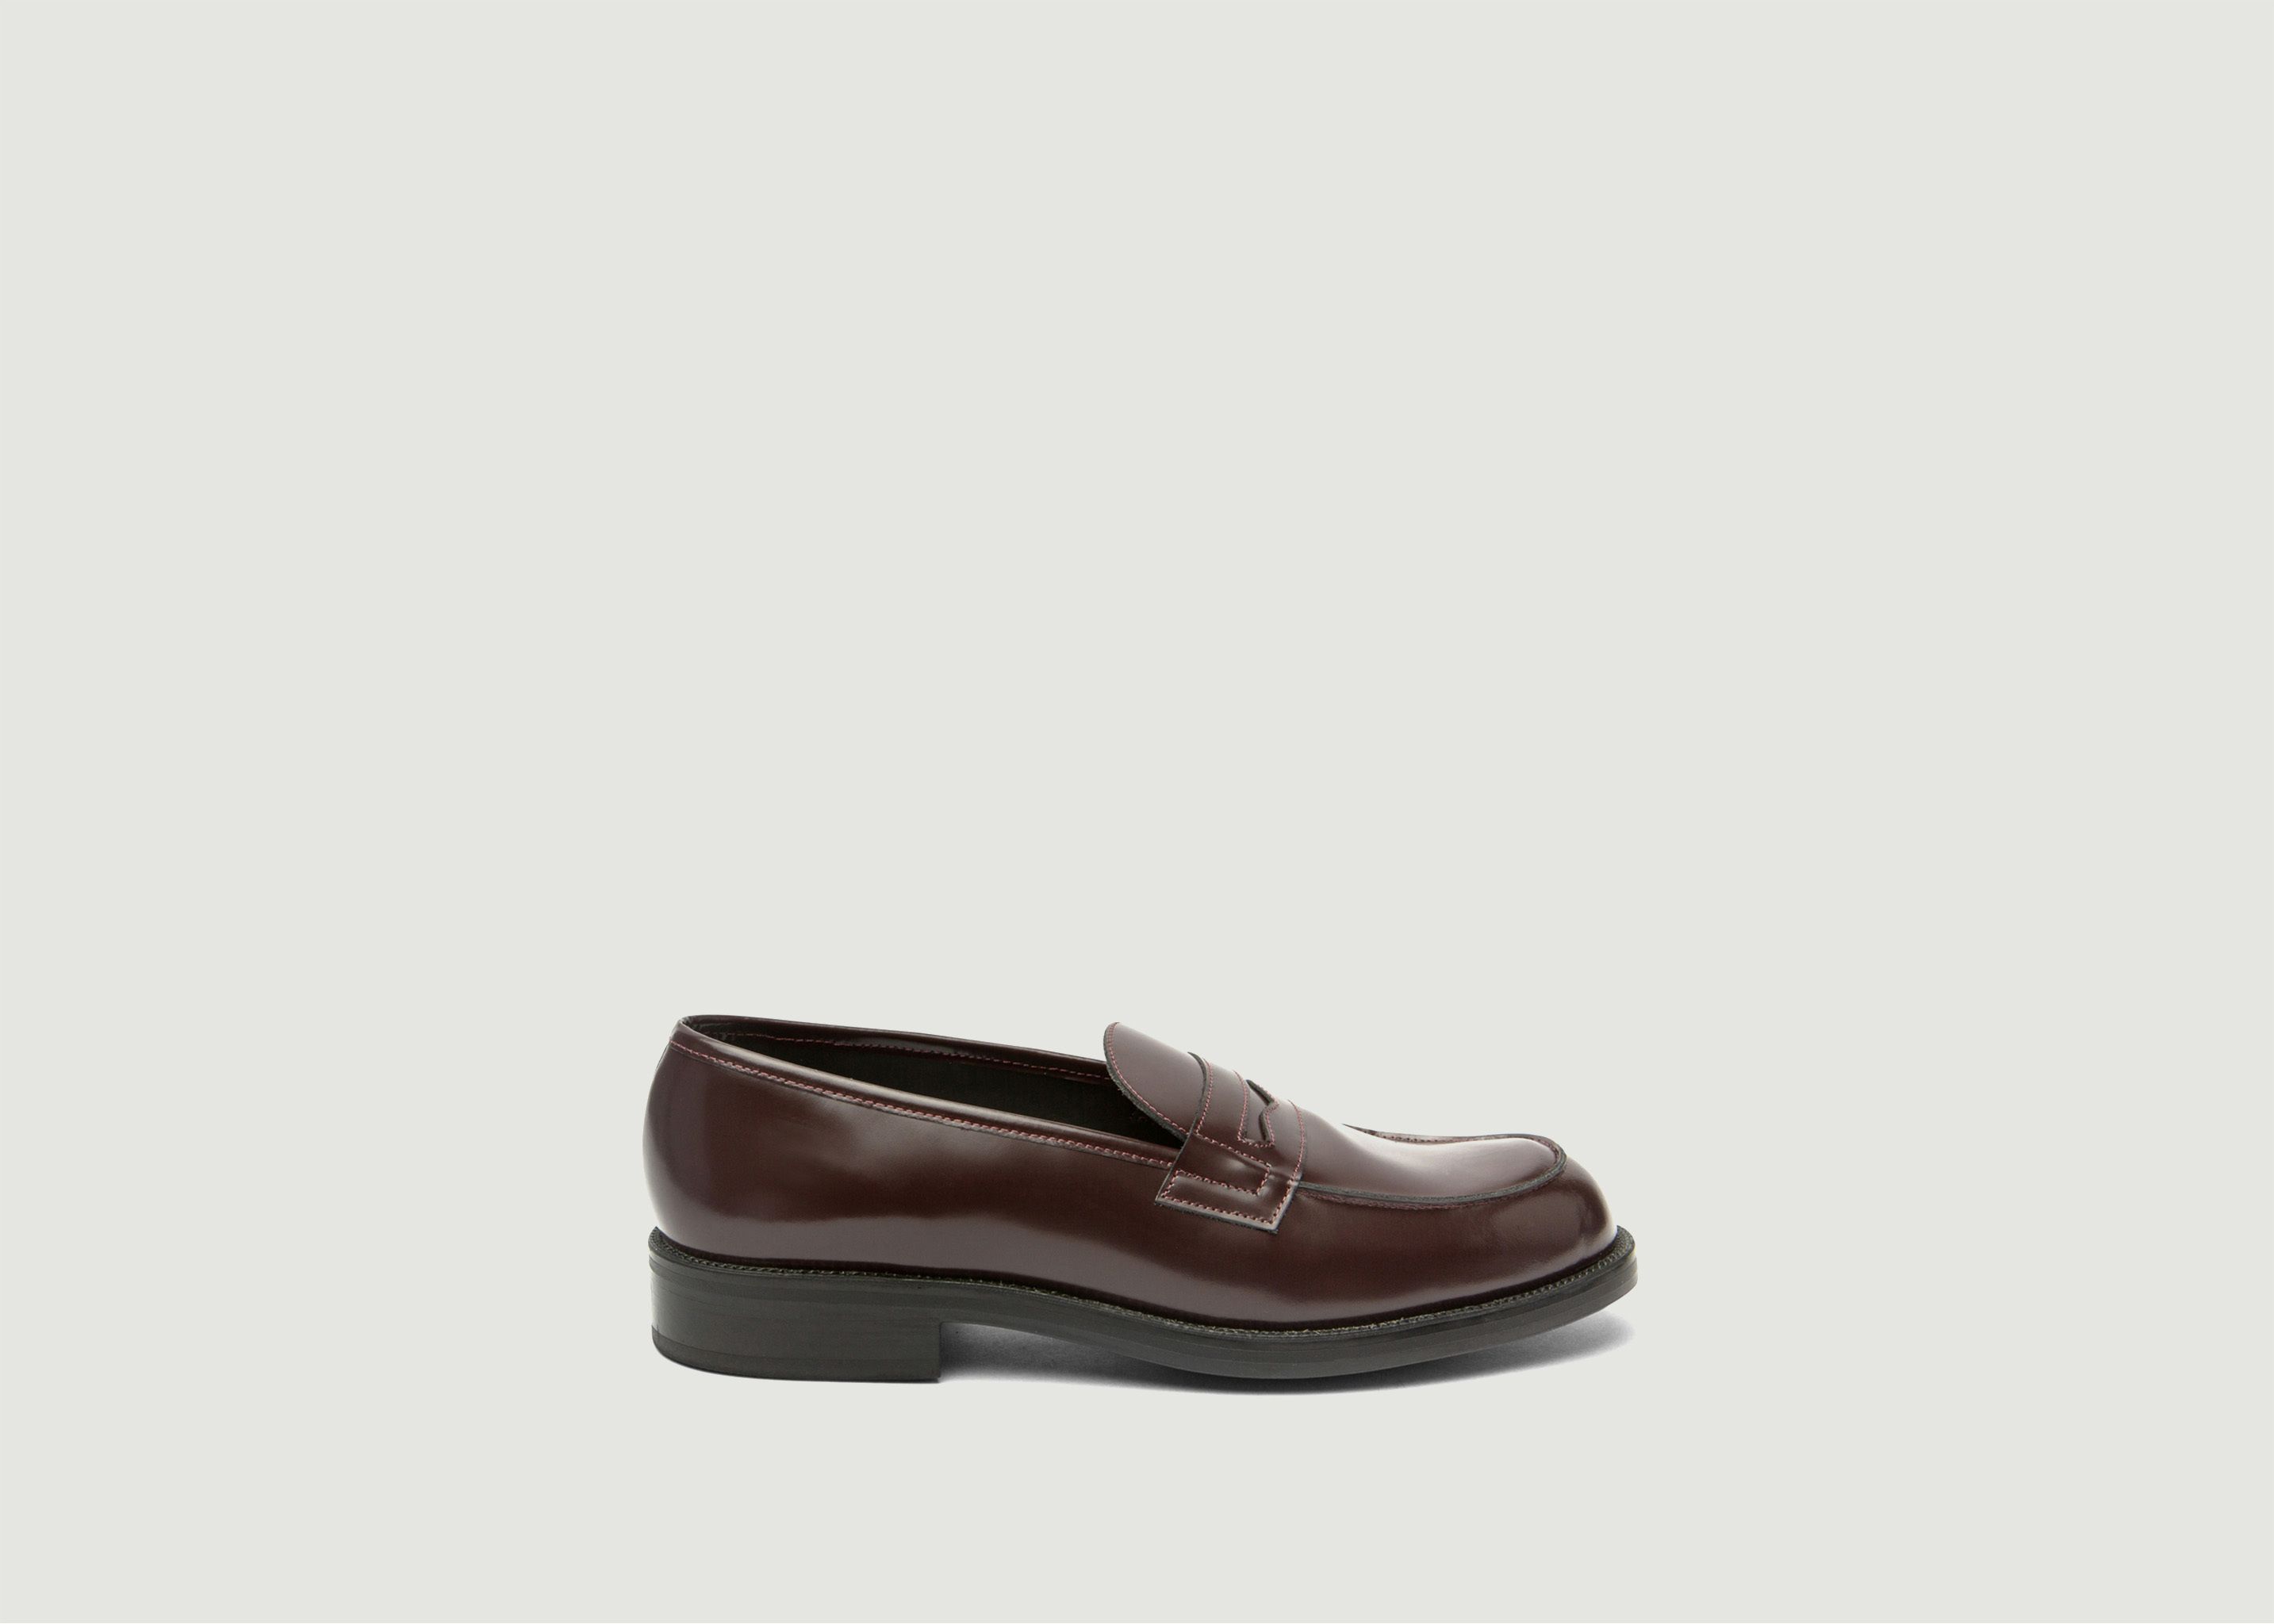 Dalior 2 loafers - Kleman